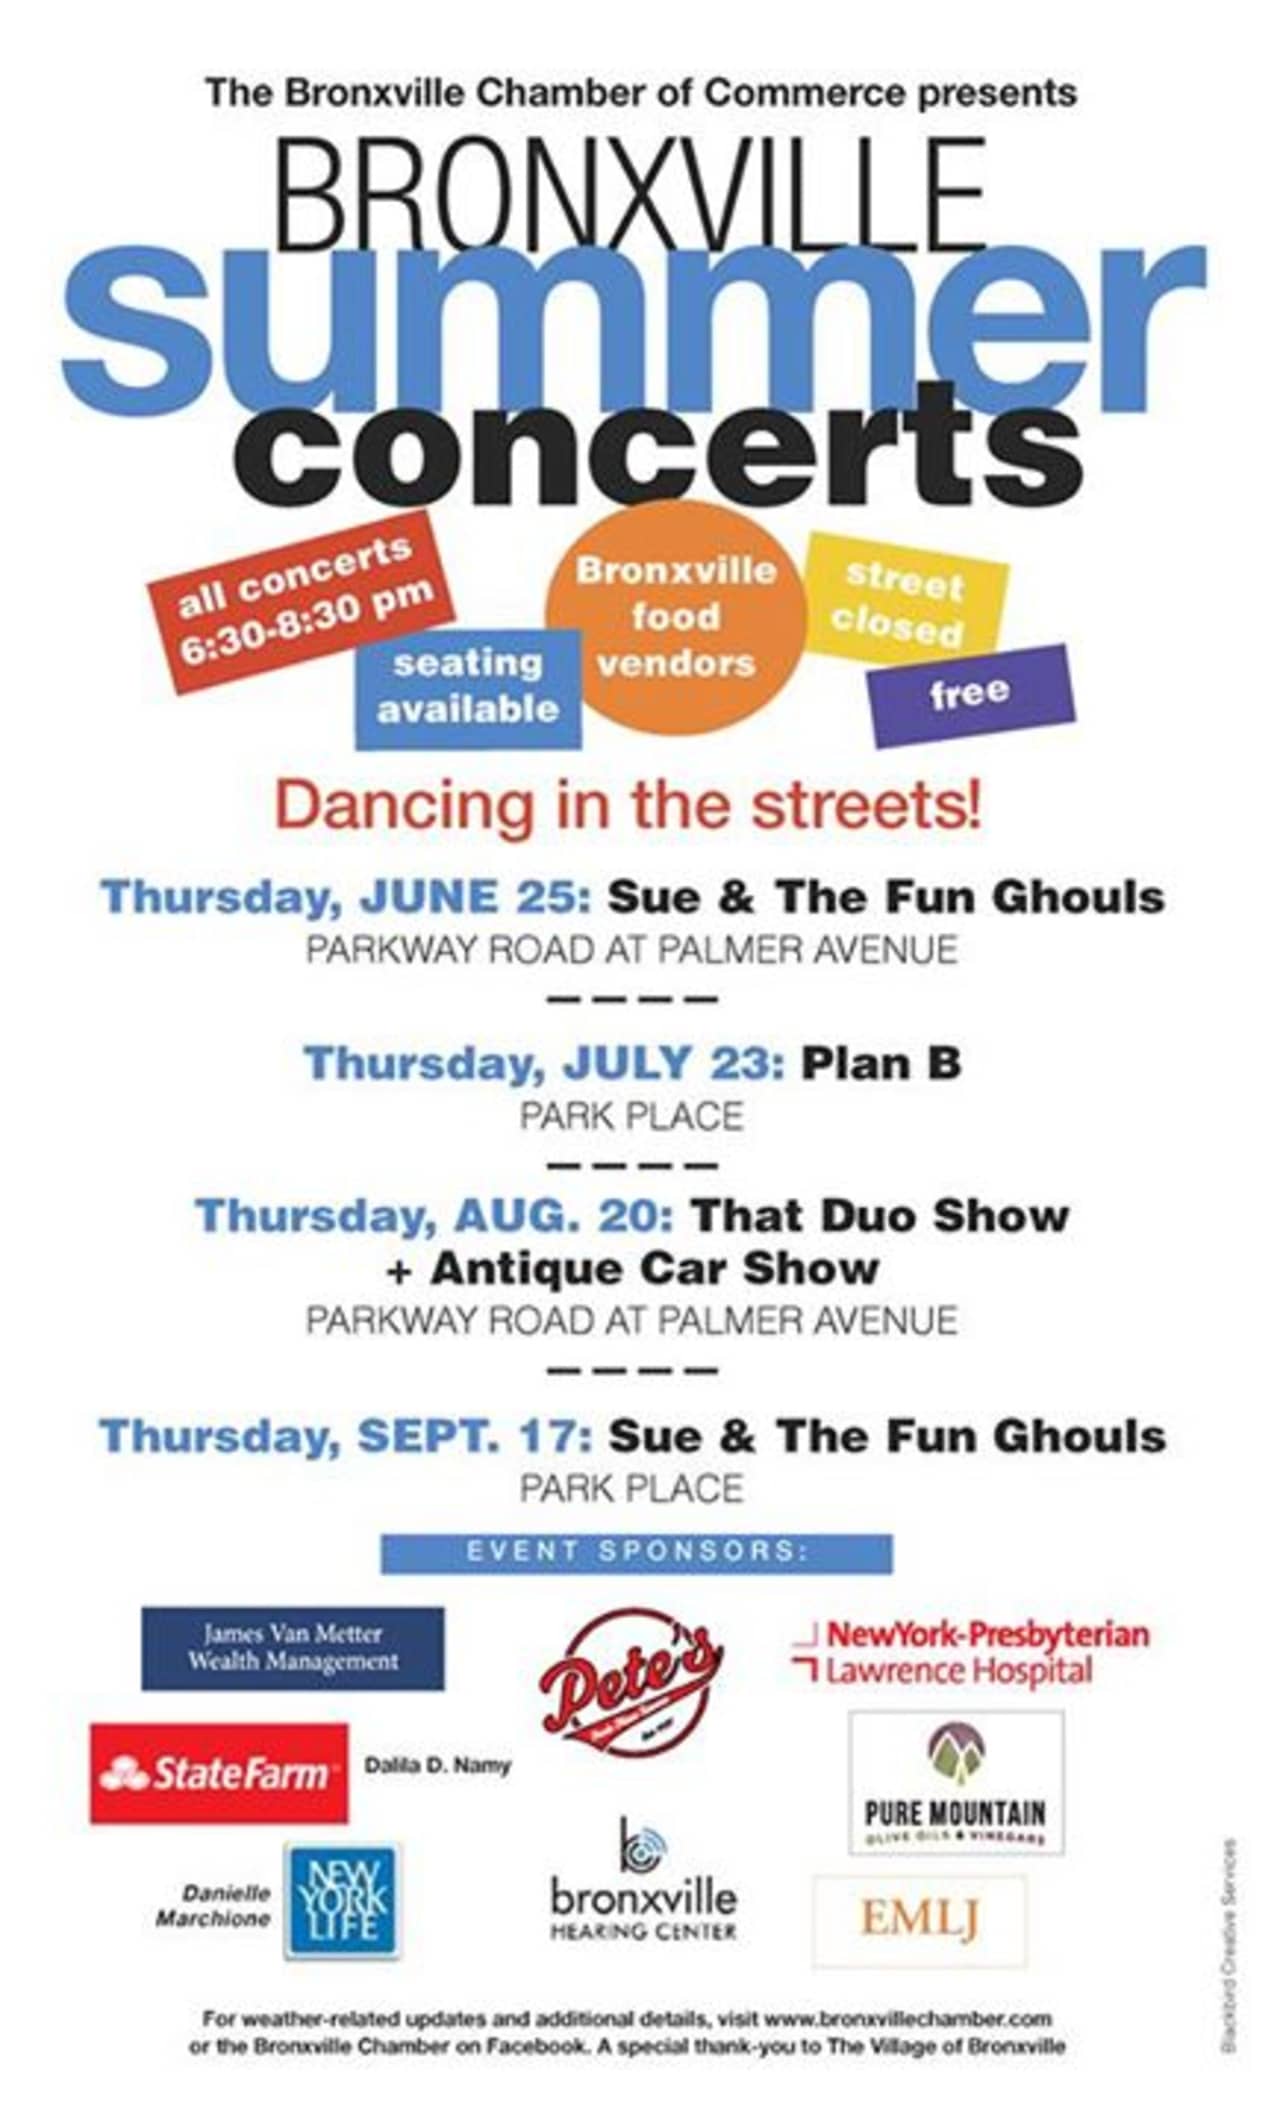 The Bronxville Chamber of Commerce is putting on concerts throughout the neighborhood on a monthly basis this summer.